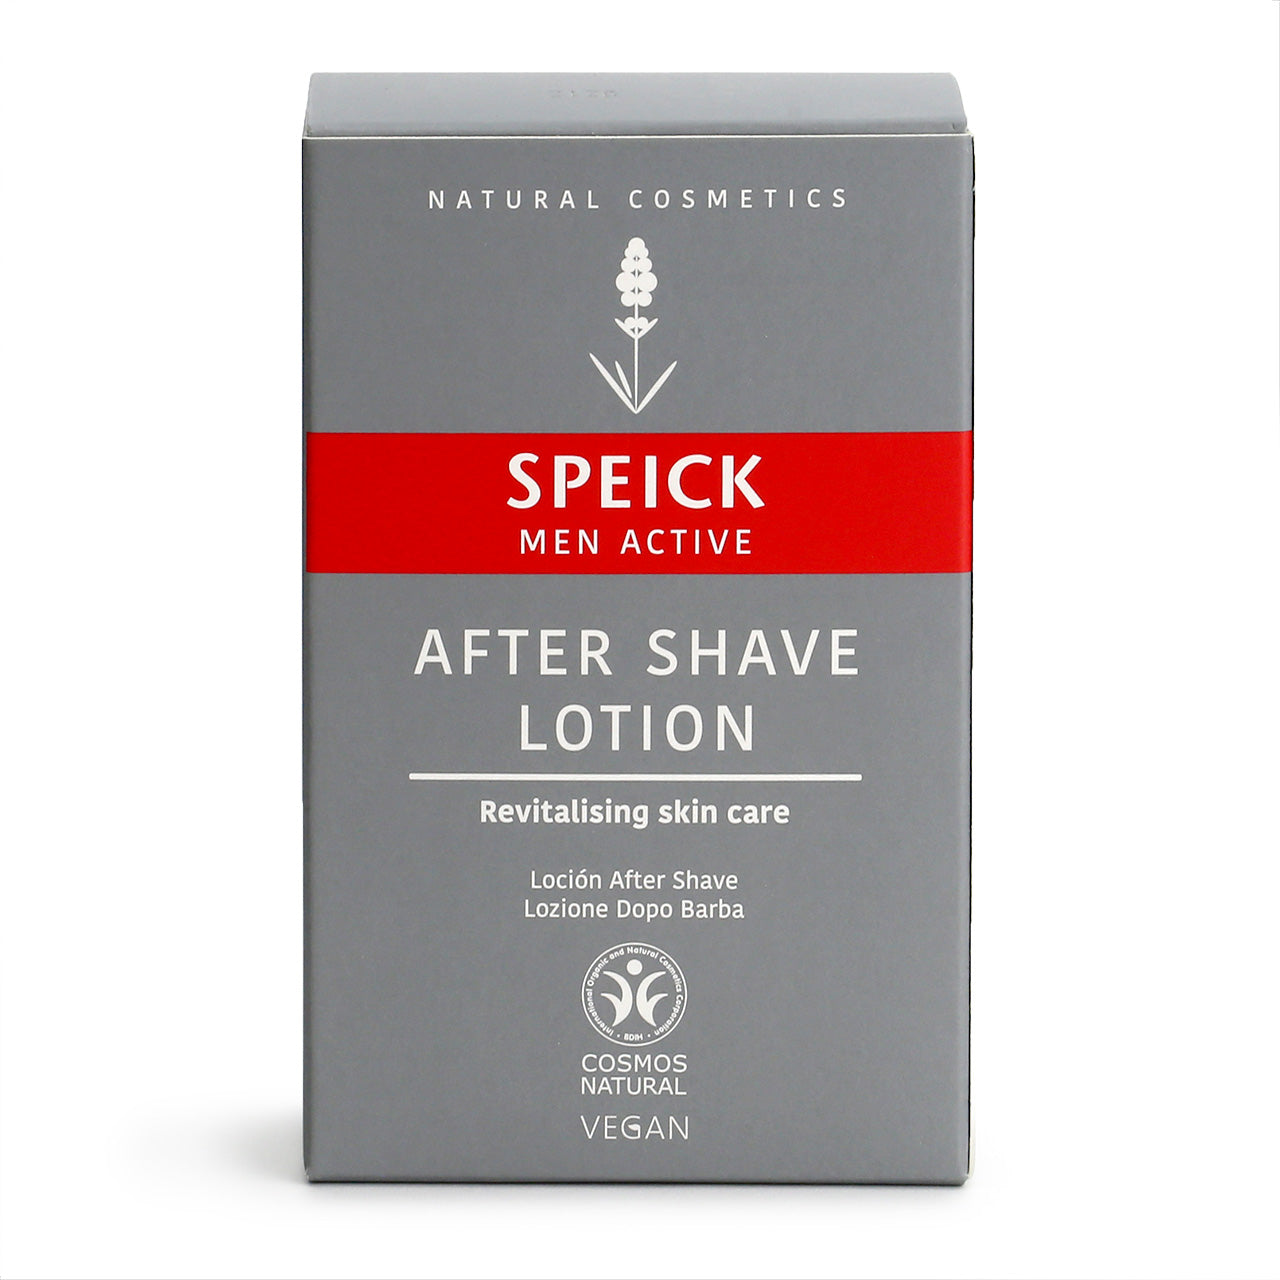 After Shave Lotion bottle with grey lid, grey and red label